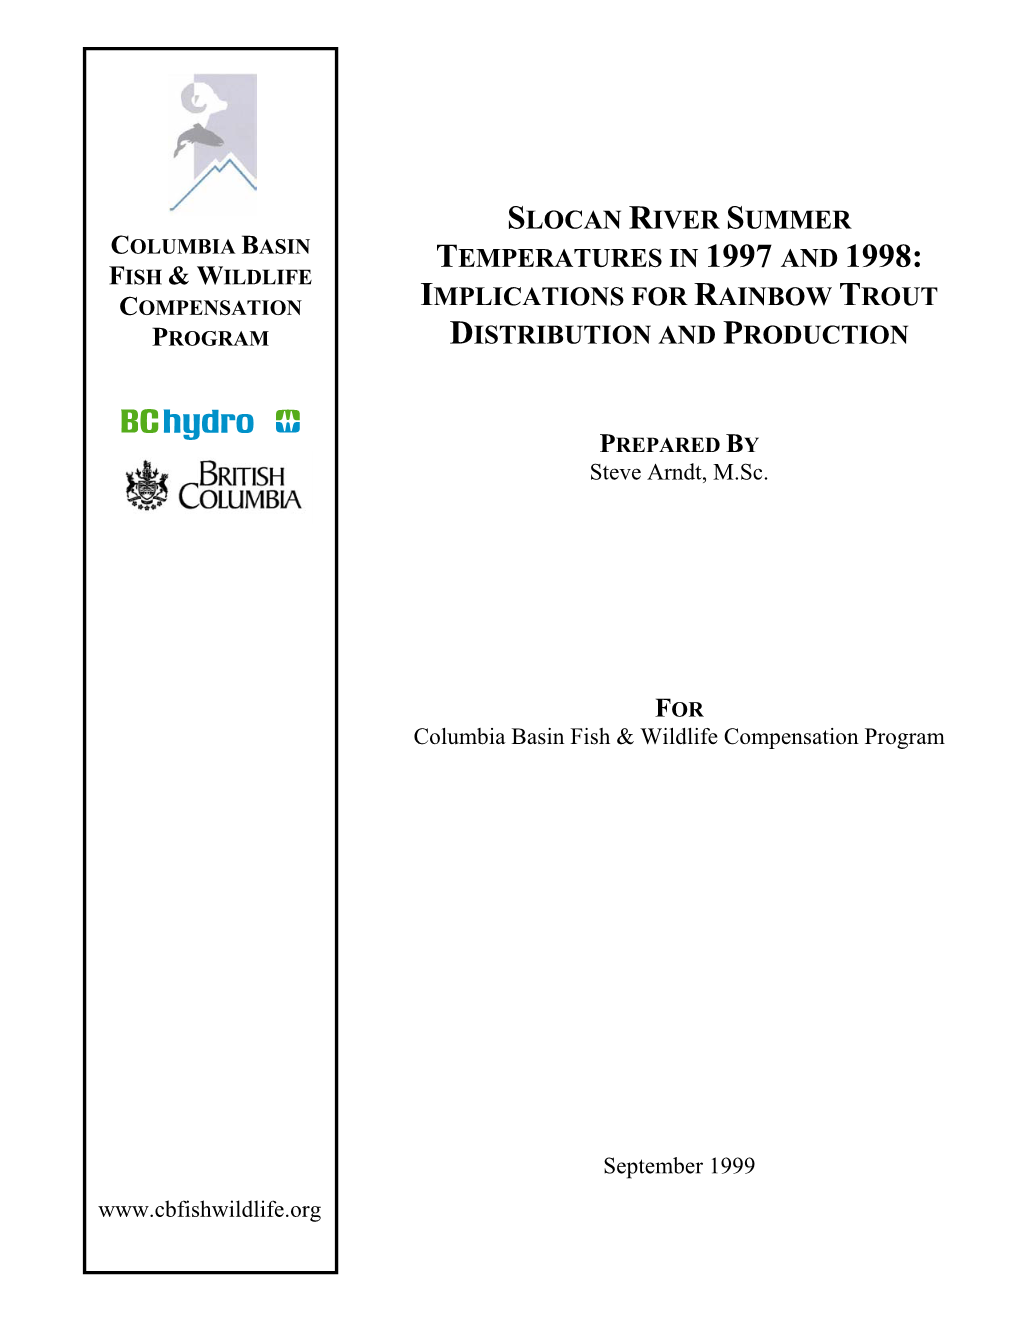 Slocan River Summer Temperatures in 1997 and 1998: Implications For